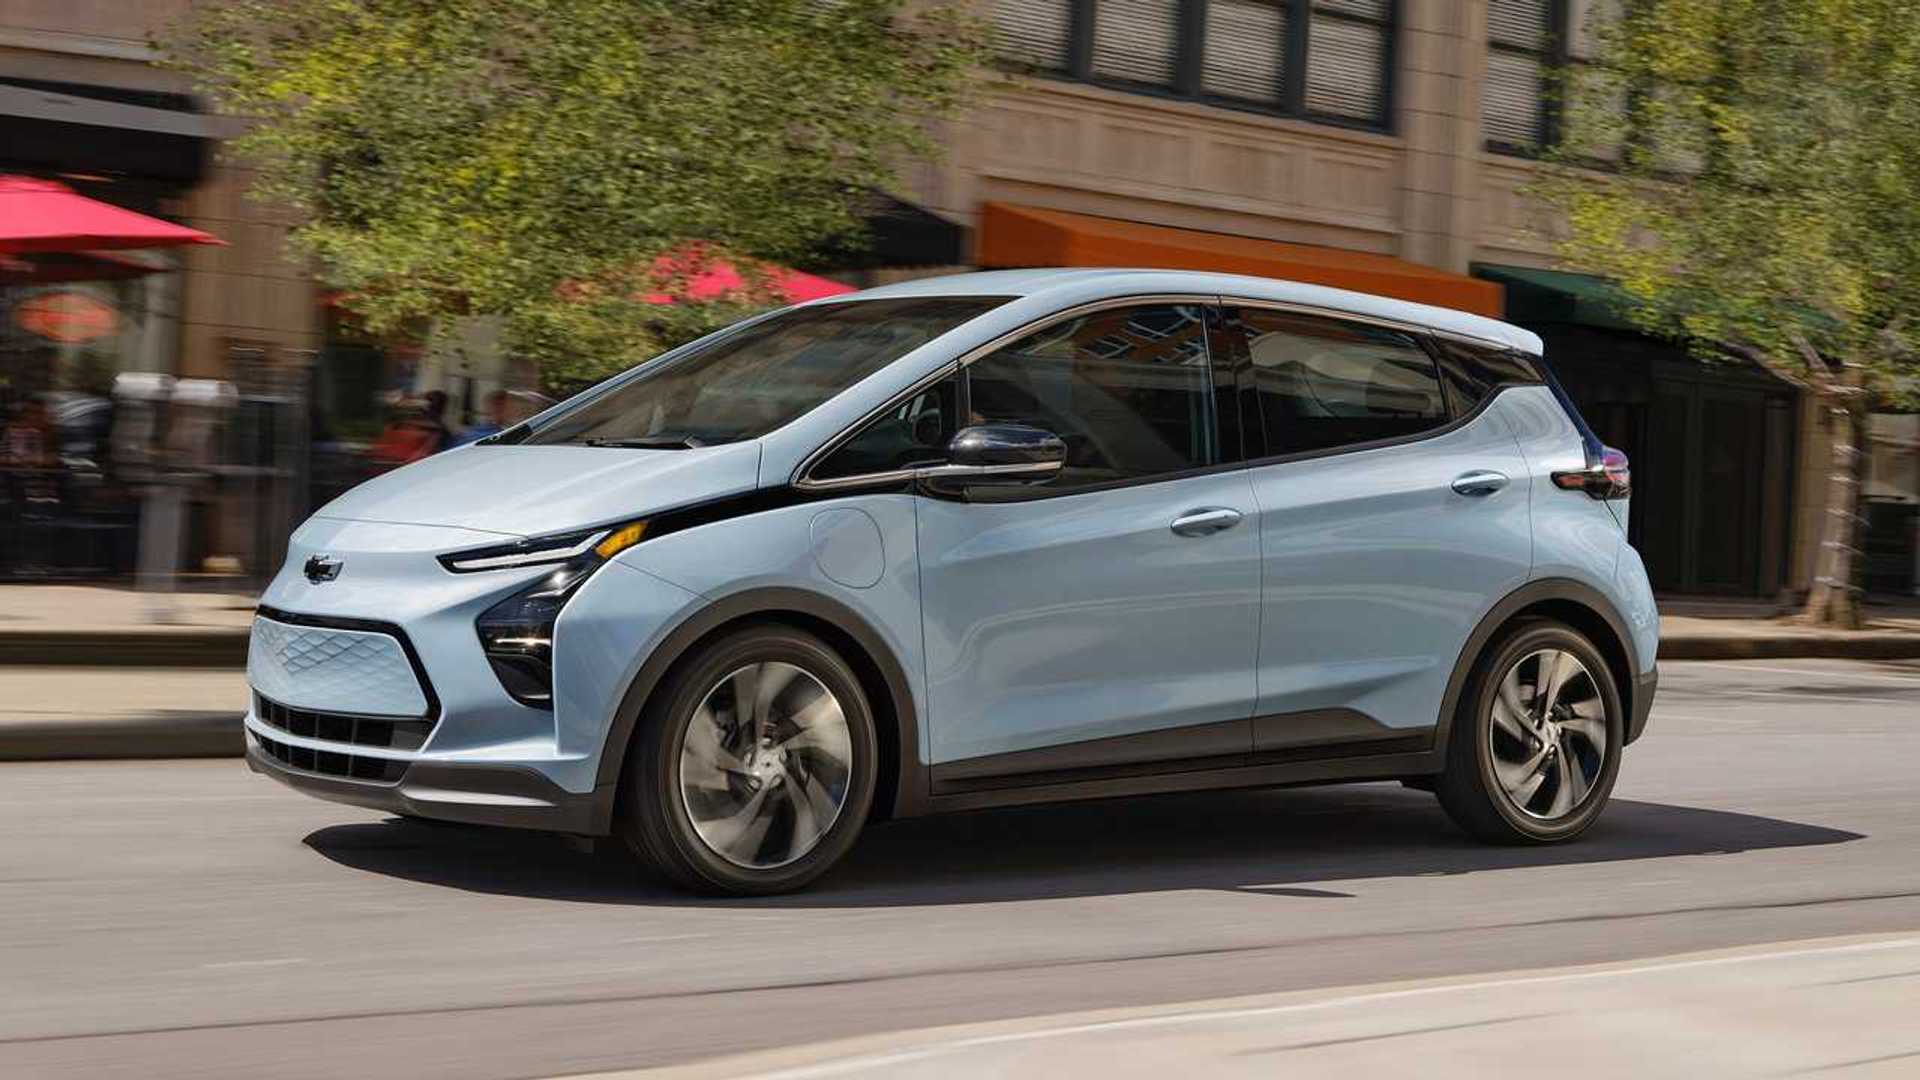 gm offers $1,400 to 2020-22 chevy bolt owners without replaced batteries